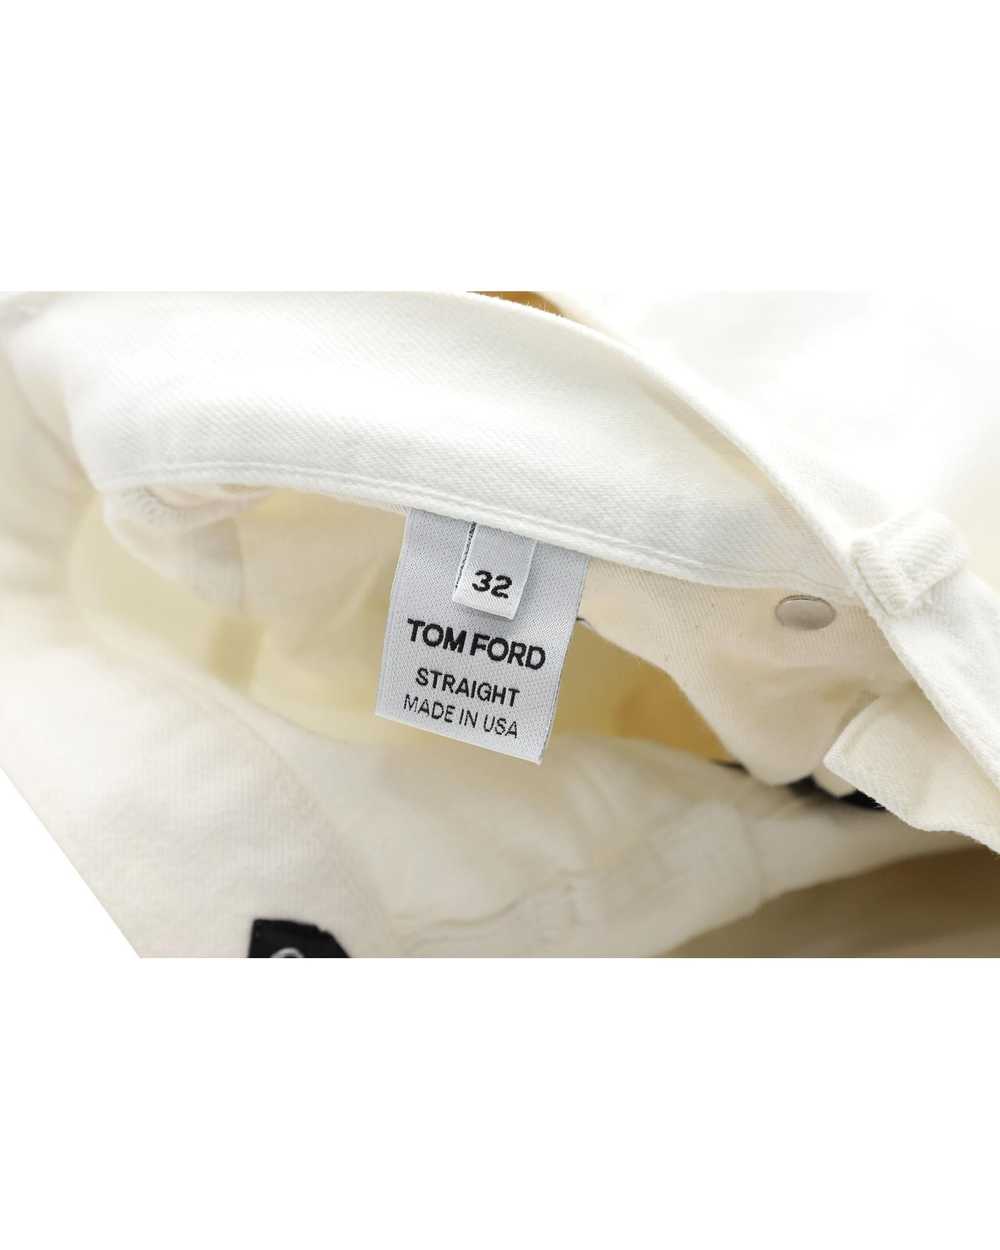 Tom Ford Straight Fit Jeans in White Cotton - image 3